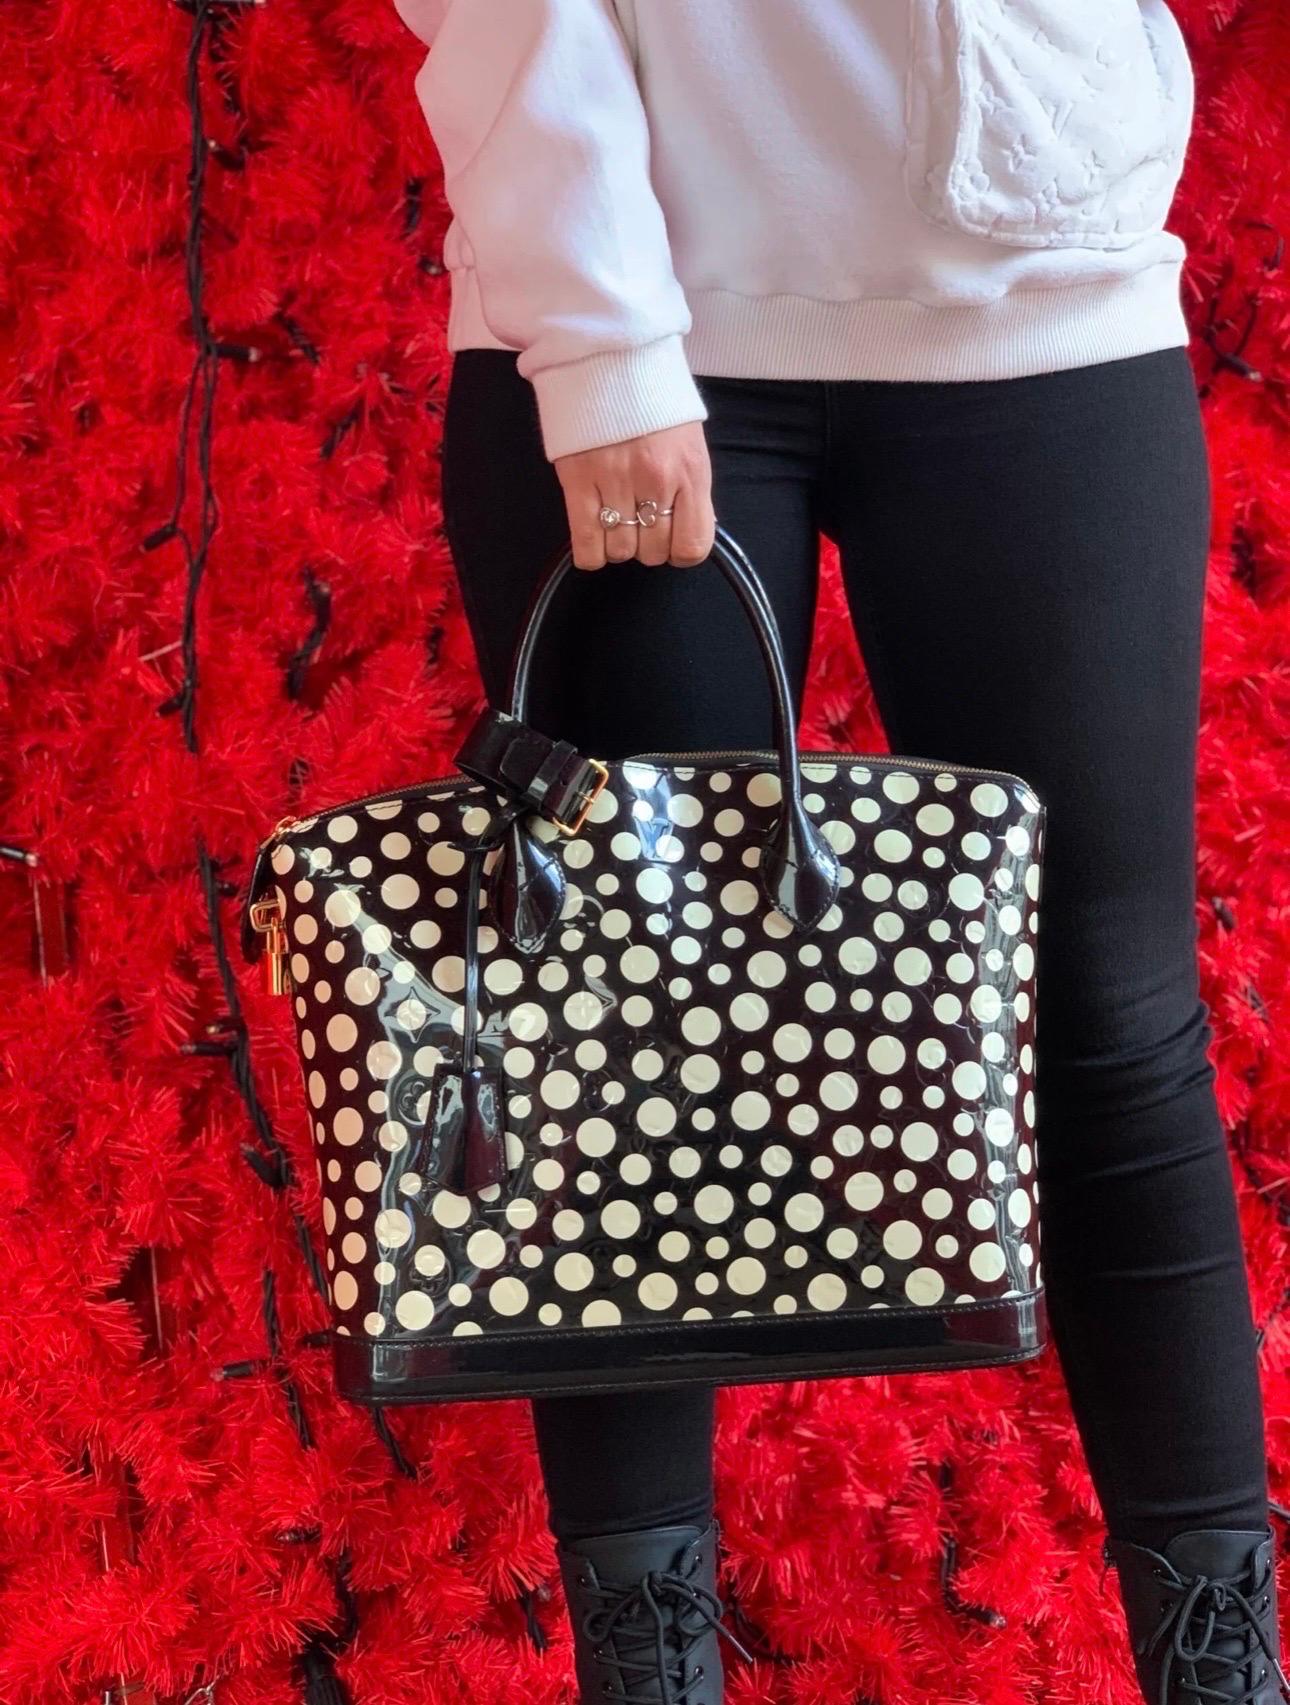 Limited Edition bag by Louis Vuitton x Yayoi Kusama in polka dot patent leather with gold hardware. It has a zip closure with padlock and special keys for opening. The interior is lined with a soft fabric and is equipped with 3 internal pockets